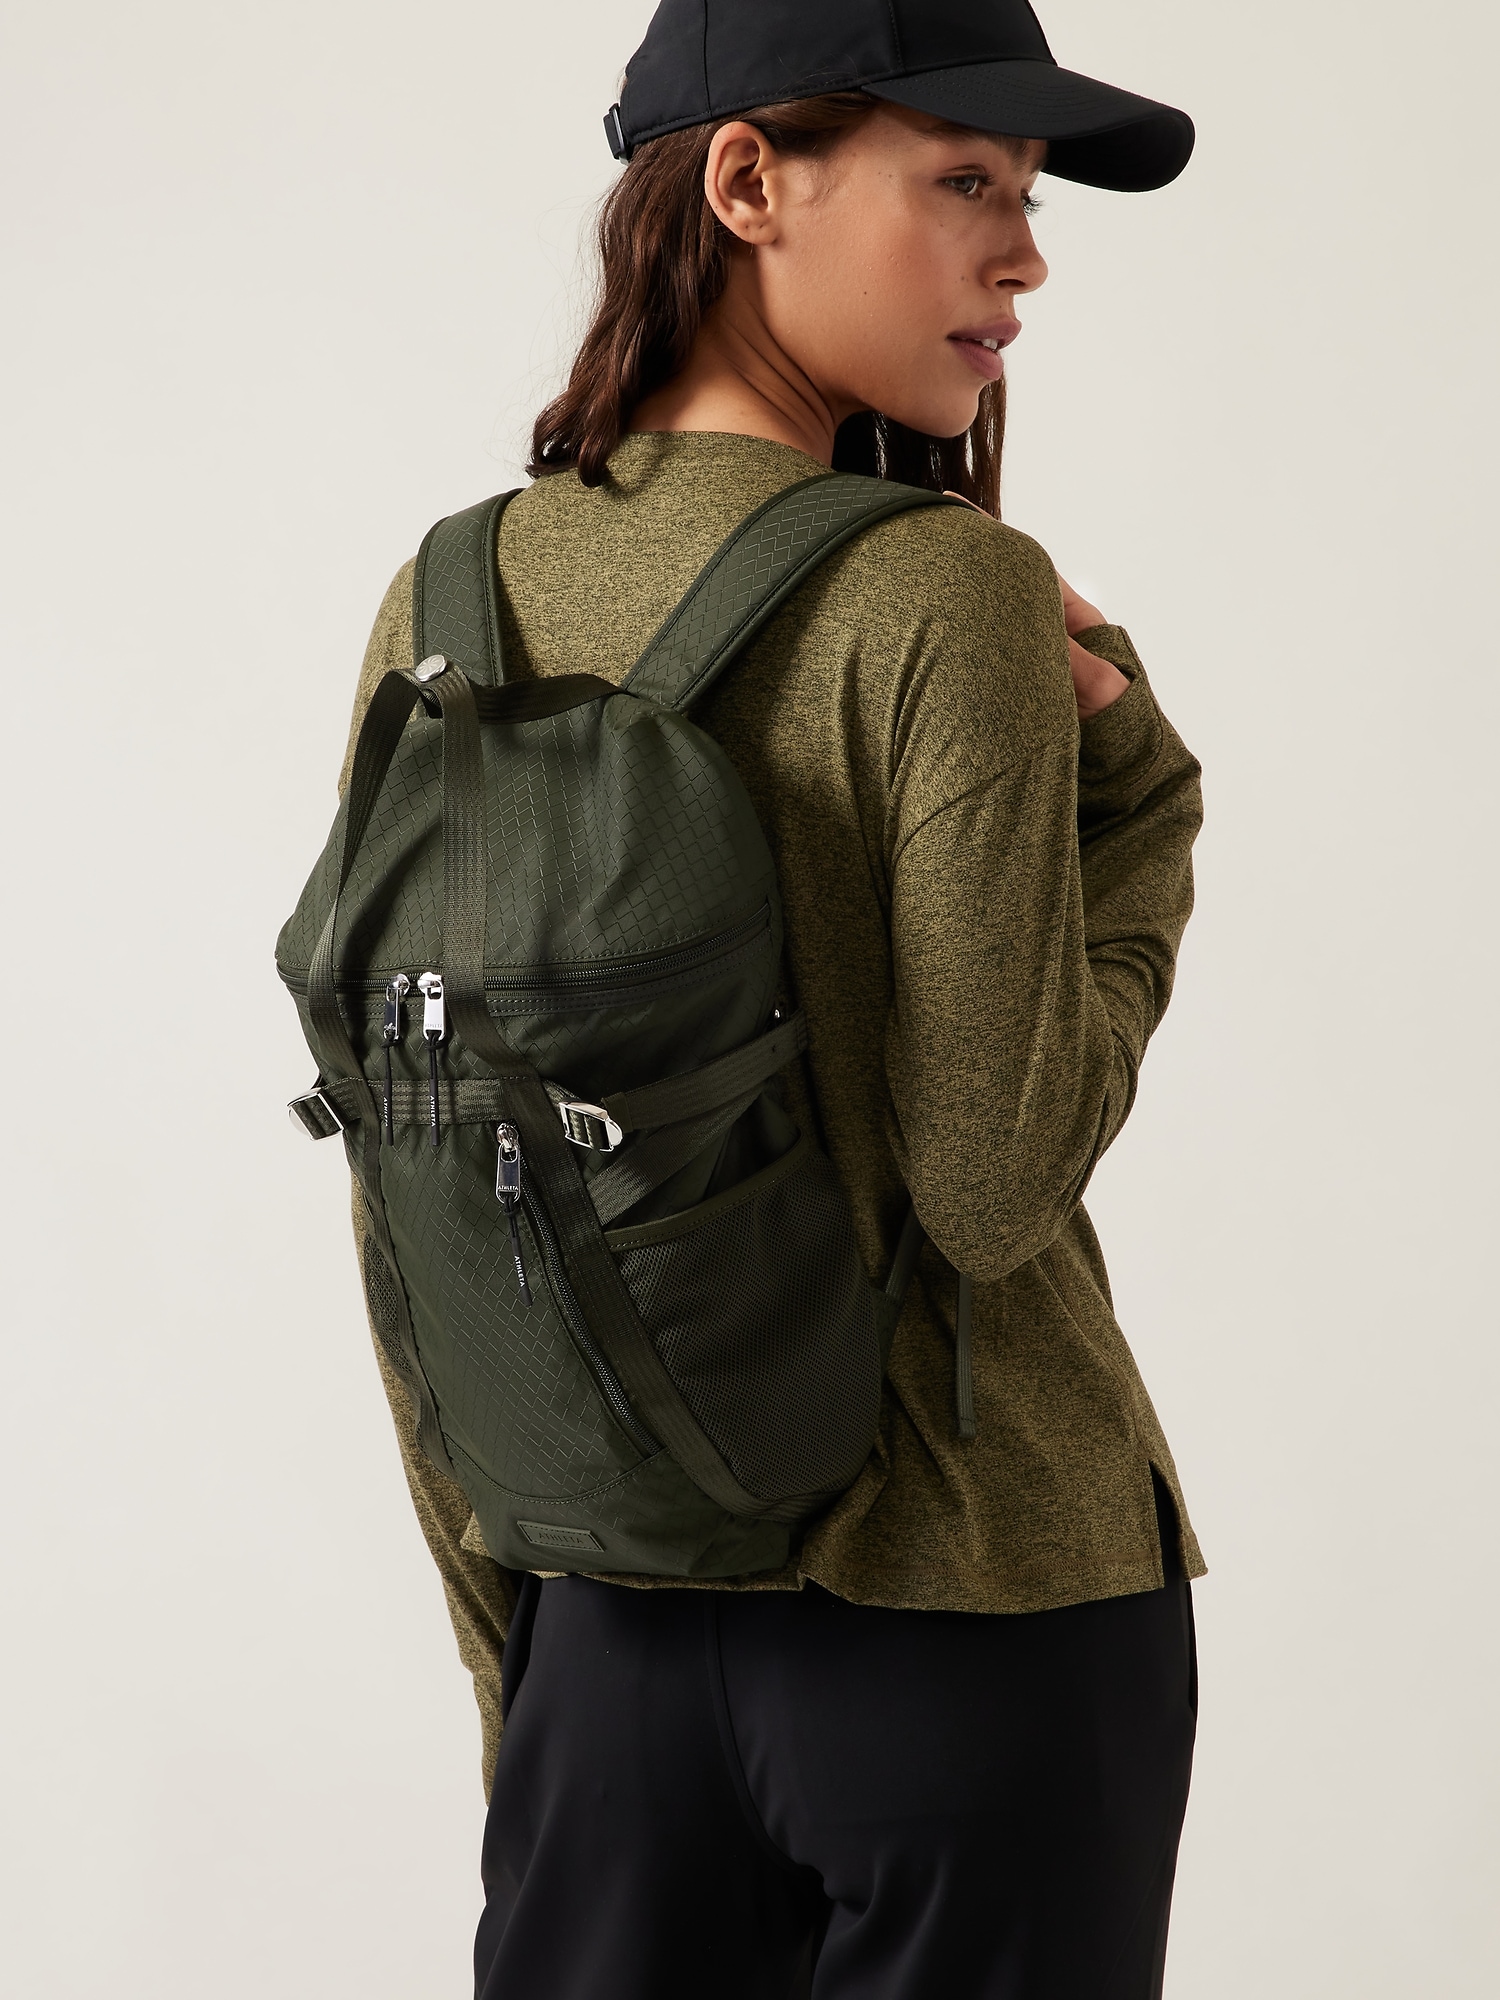 Athleta Excursion Backpack green. 1